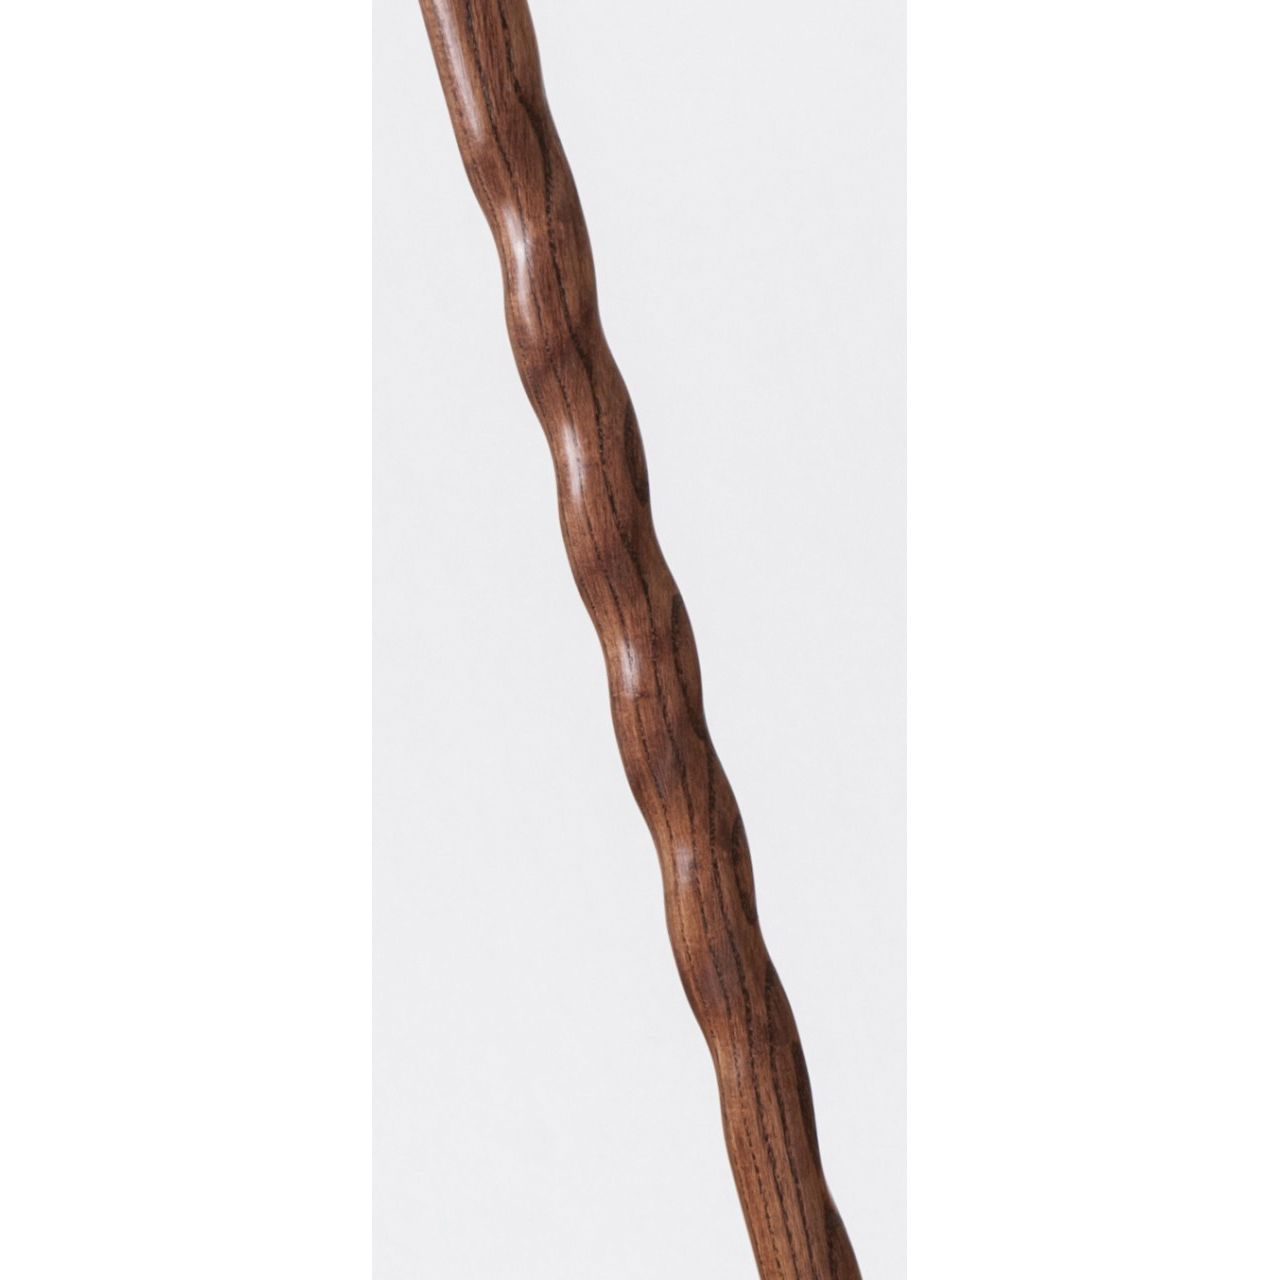 Brazos 502-3000-0051 Twisted Walking Cane, 34 in H Cane, Derby Handle, Wood Handle, Oak Wood, Red - 3